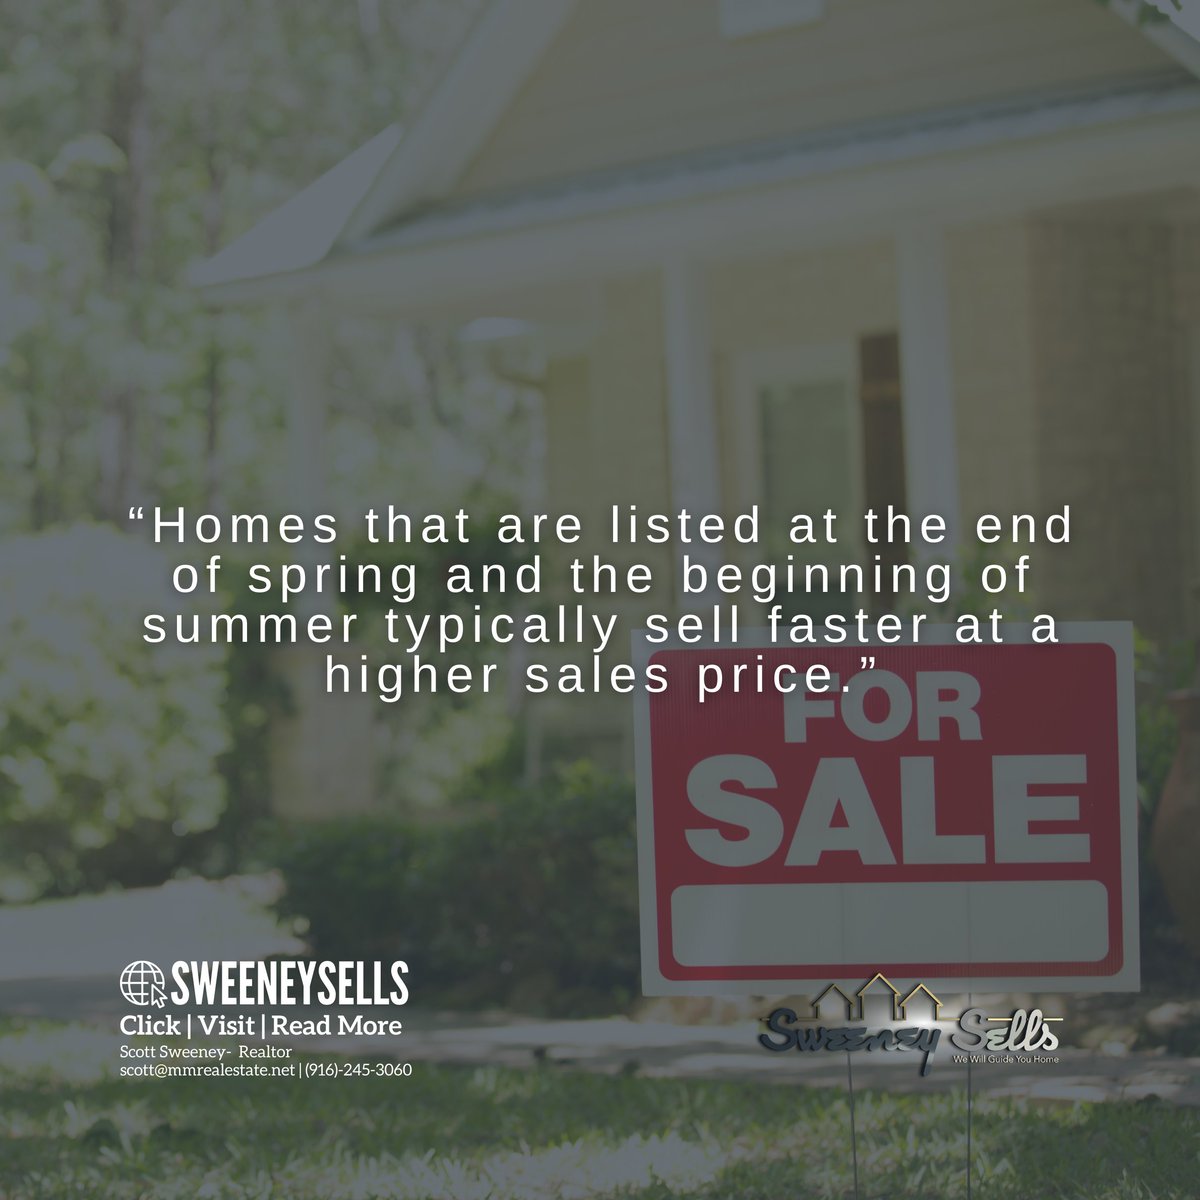 Now’s a Great Time To Sell Your House
🔎Click below to read more, call/text us at (916)-245-3060
💻 | sweeneysells.com

#MMRealEstate #realtor #realestateagent #sweeneysells #listwithsweeney #listingspecialist #sweeneyworldwide